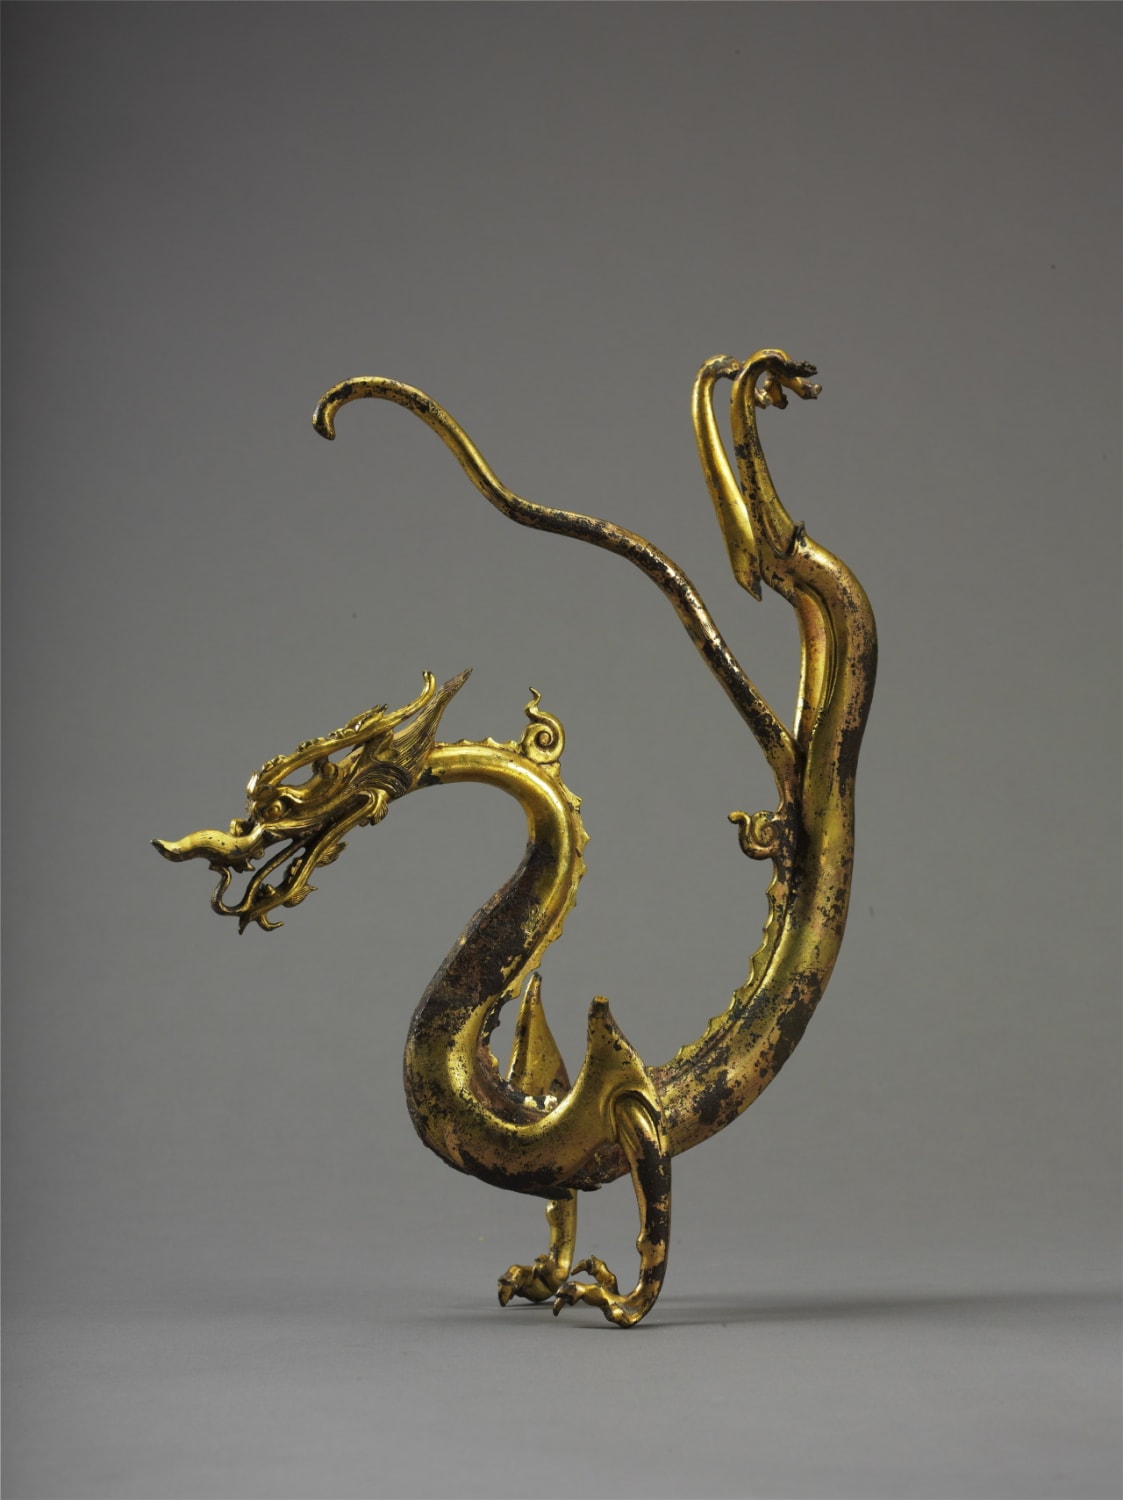 Gilded Bronze Dragon from Tang Dynasty, unearthed from Caochangpo in the southern suburb of Xian in 1975. 7th-10th century China. Shaanxi History Museum.